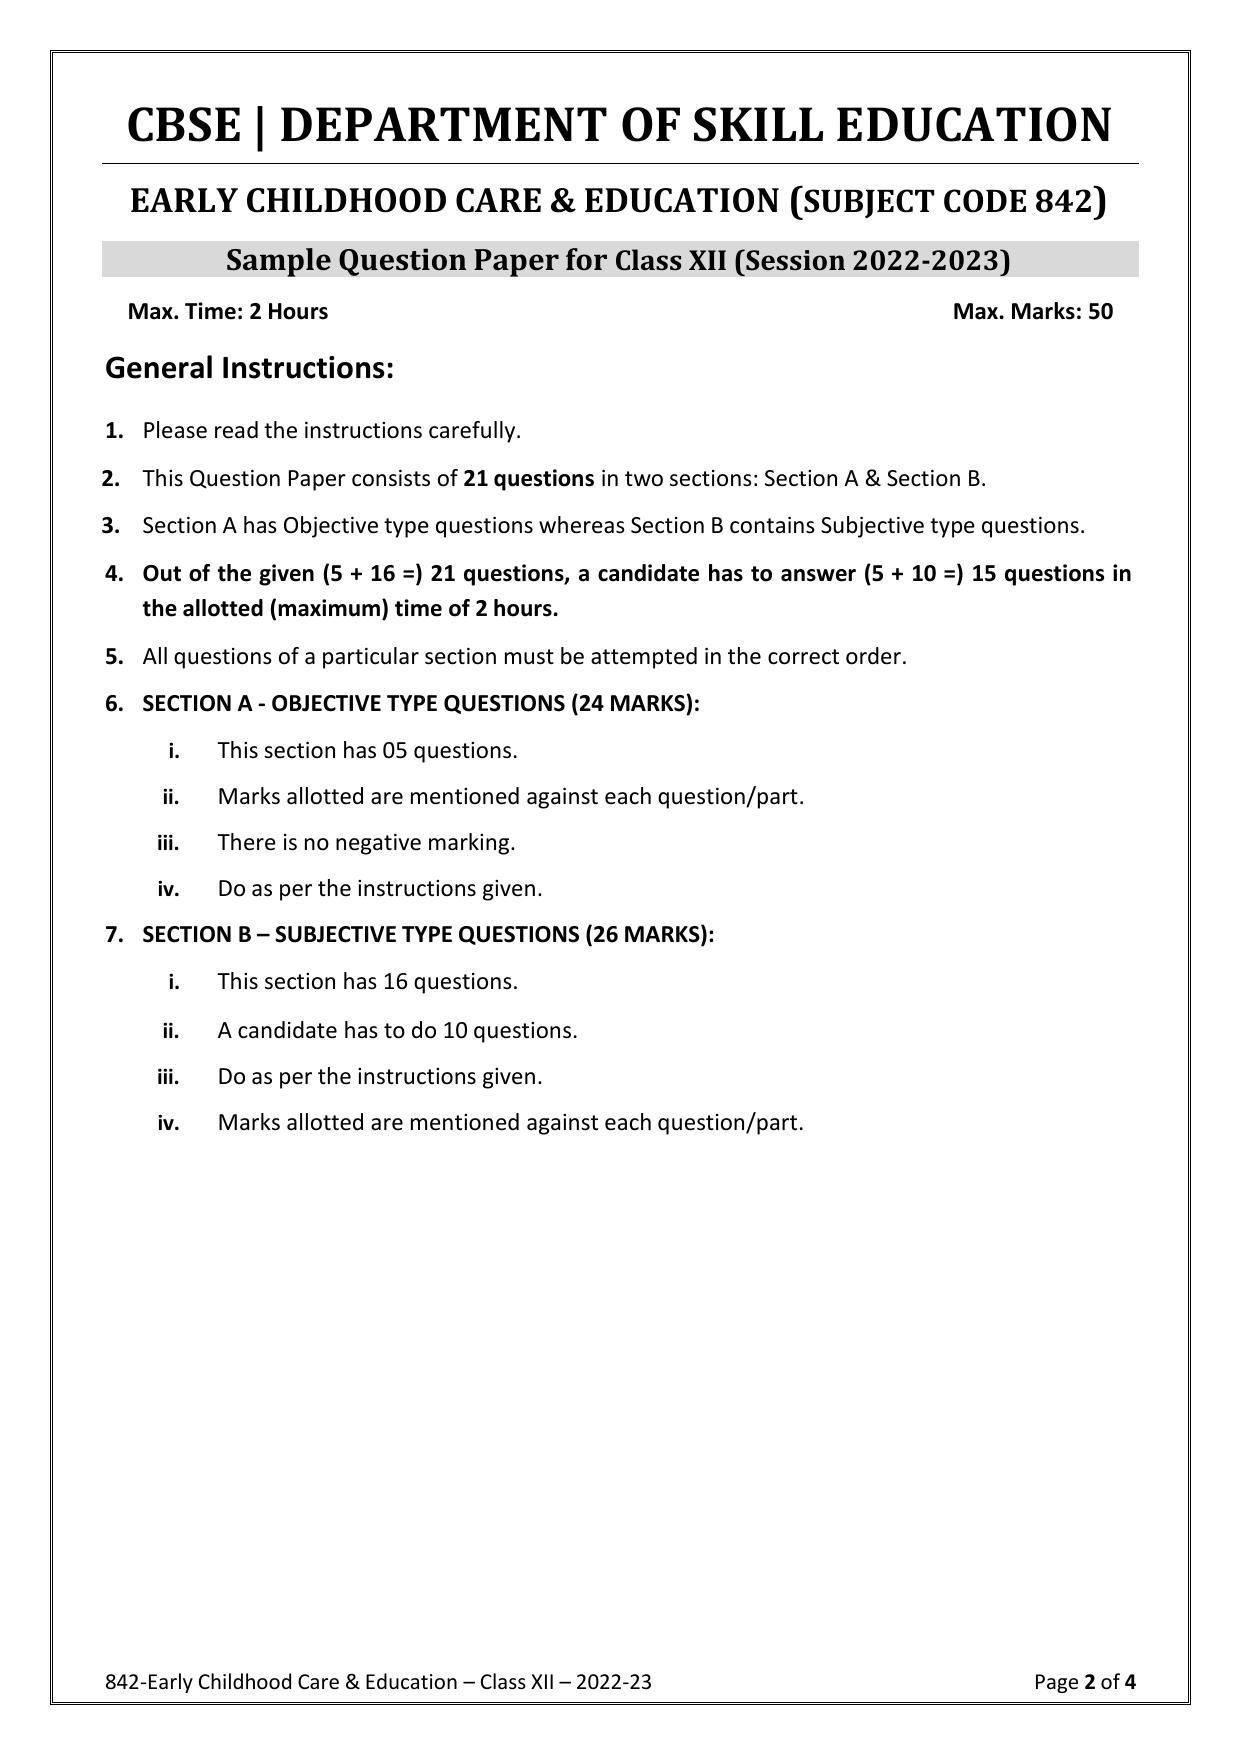 CBSE Class 10 Early Childhood Care & Education (Skill Education) Sample Papers 2023 - Page 2